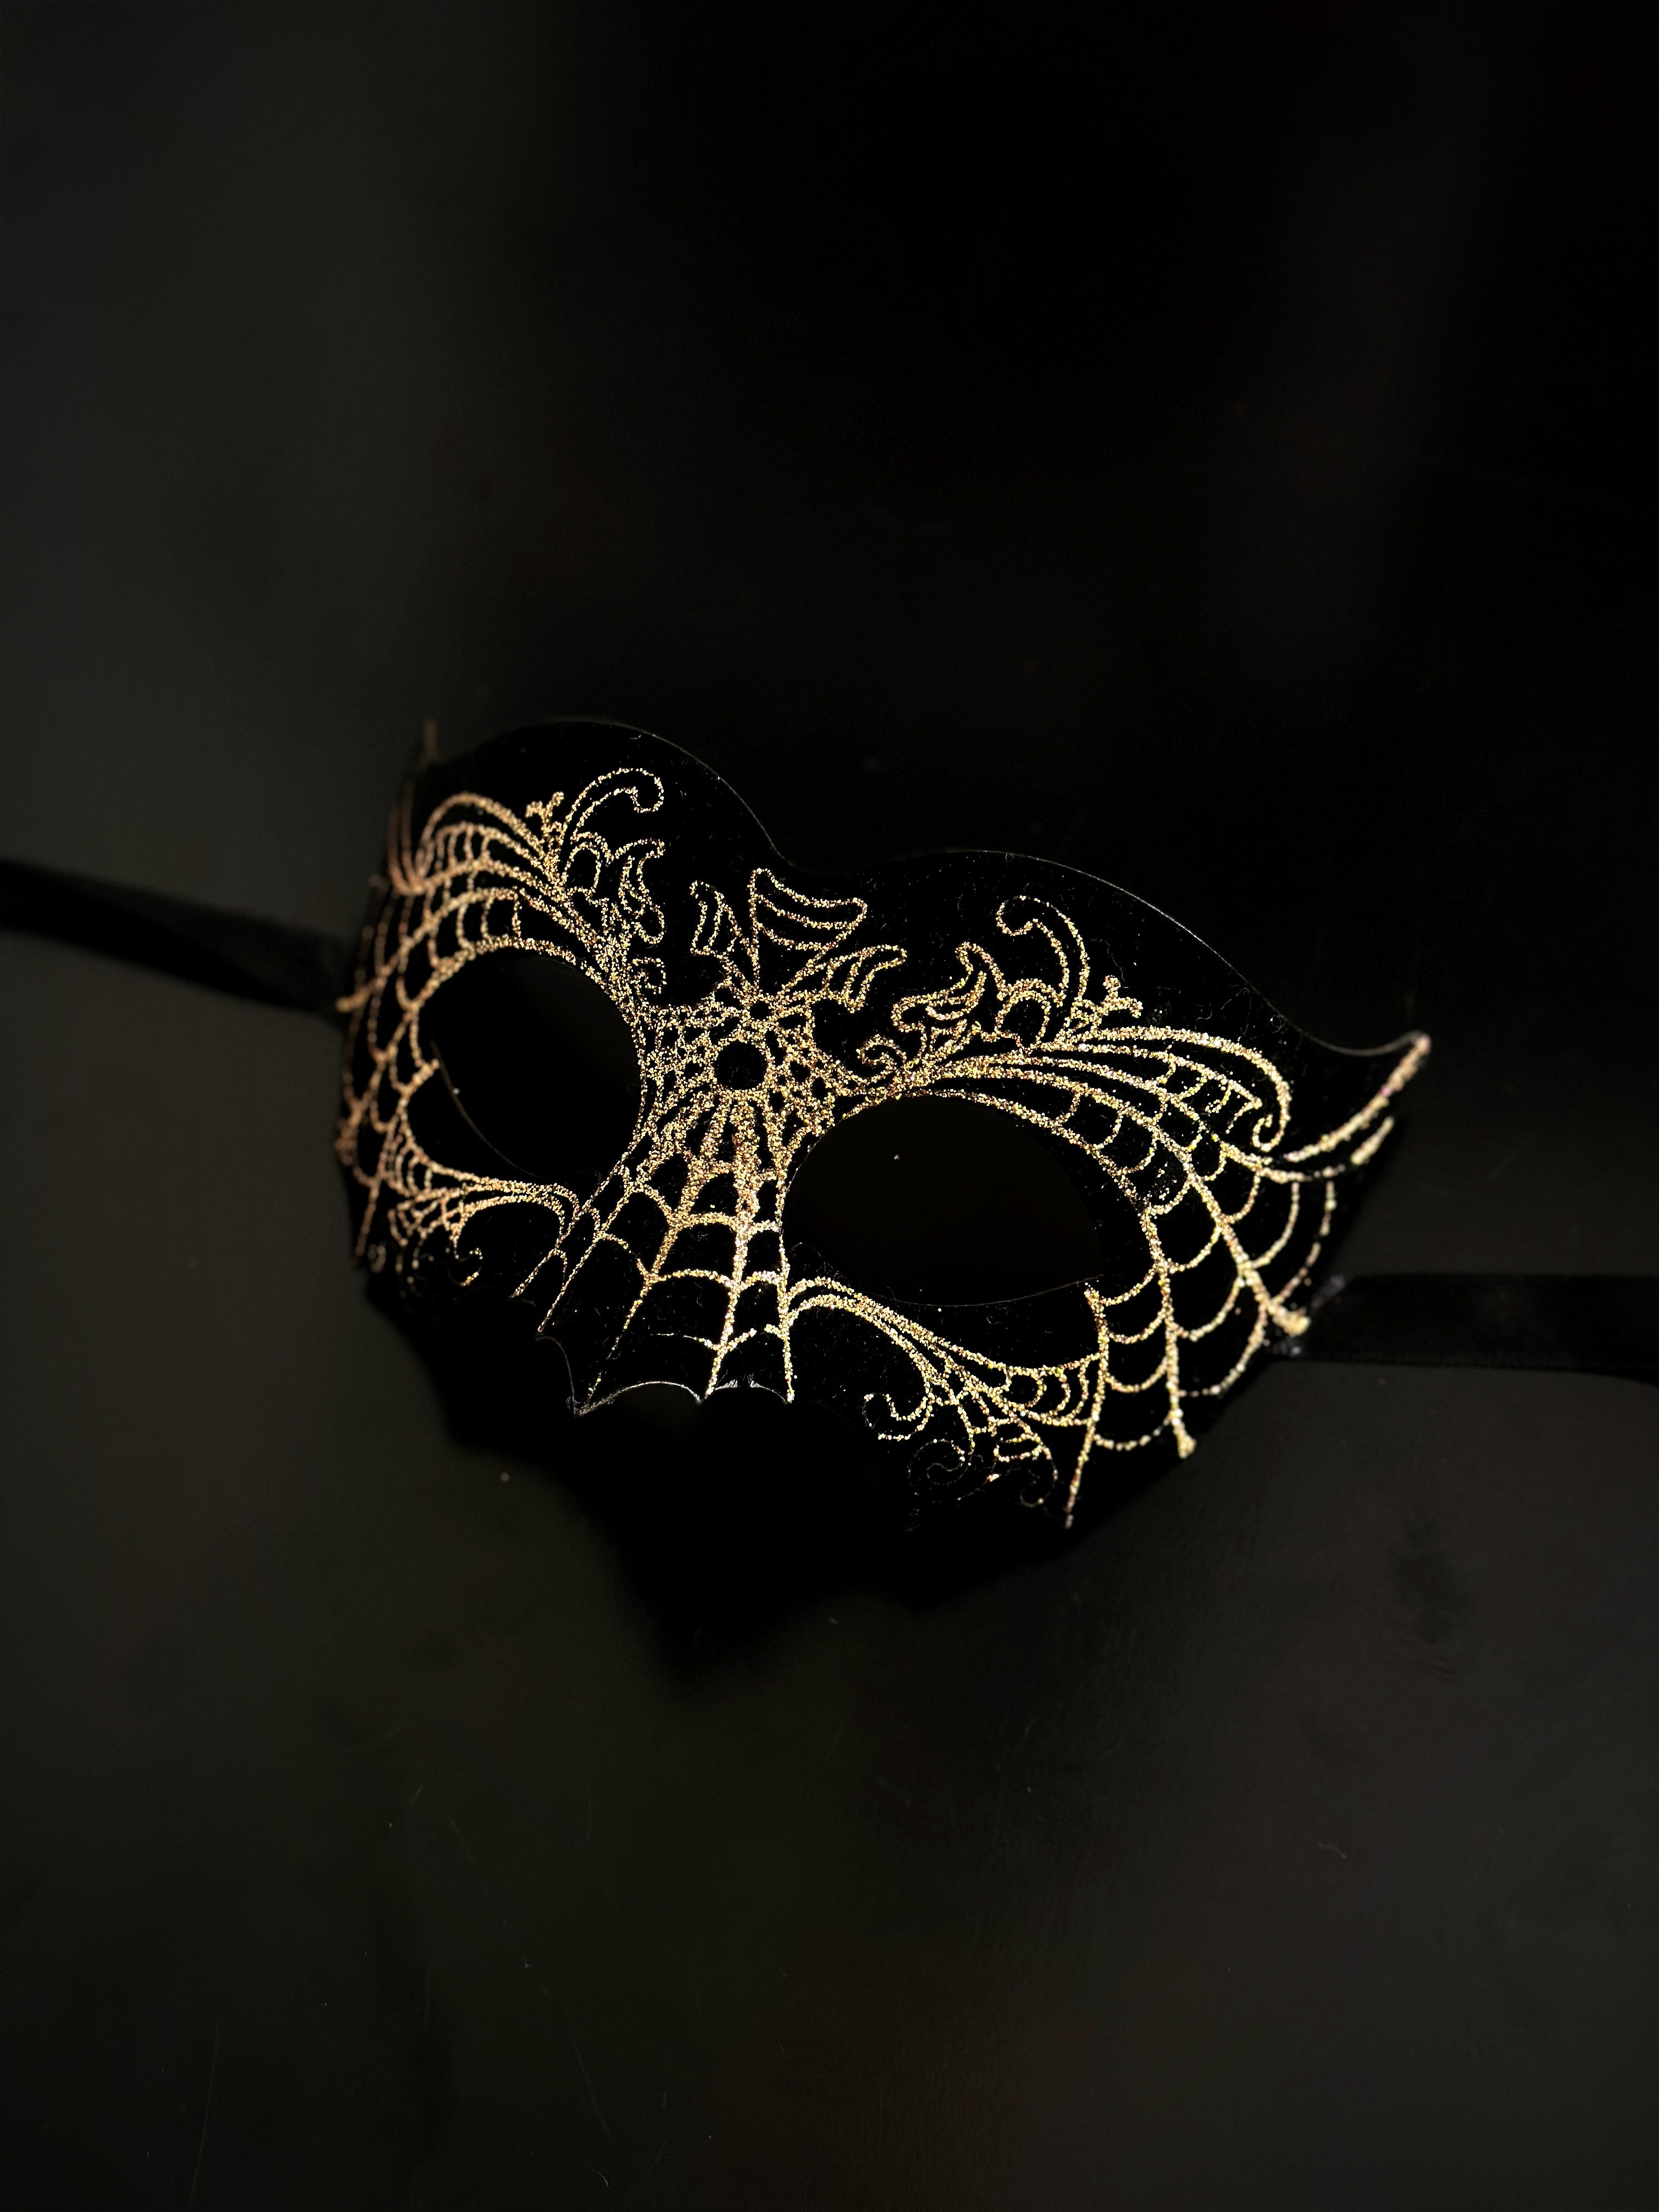 Unisex masquerade mask in black with a gold design.